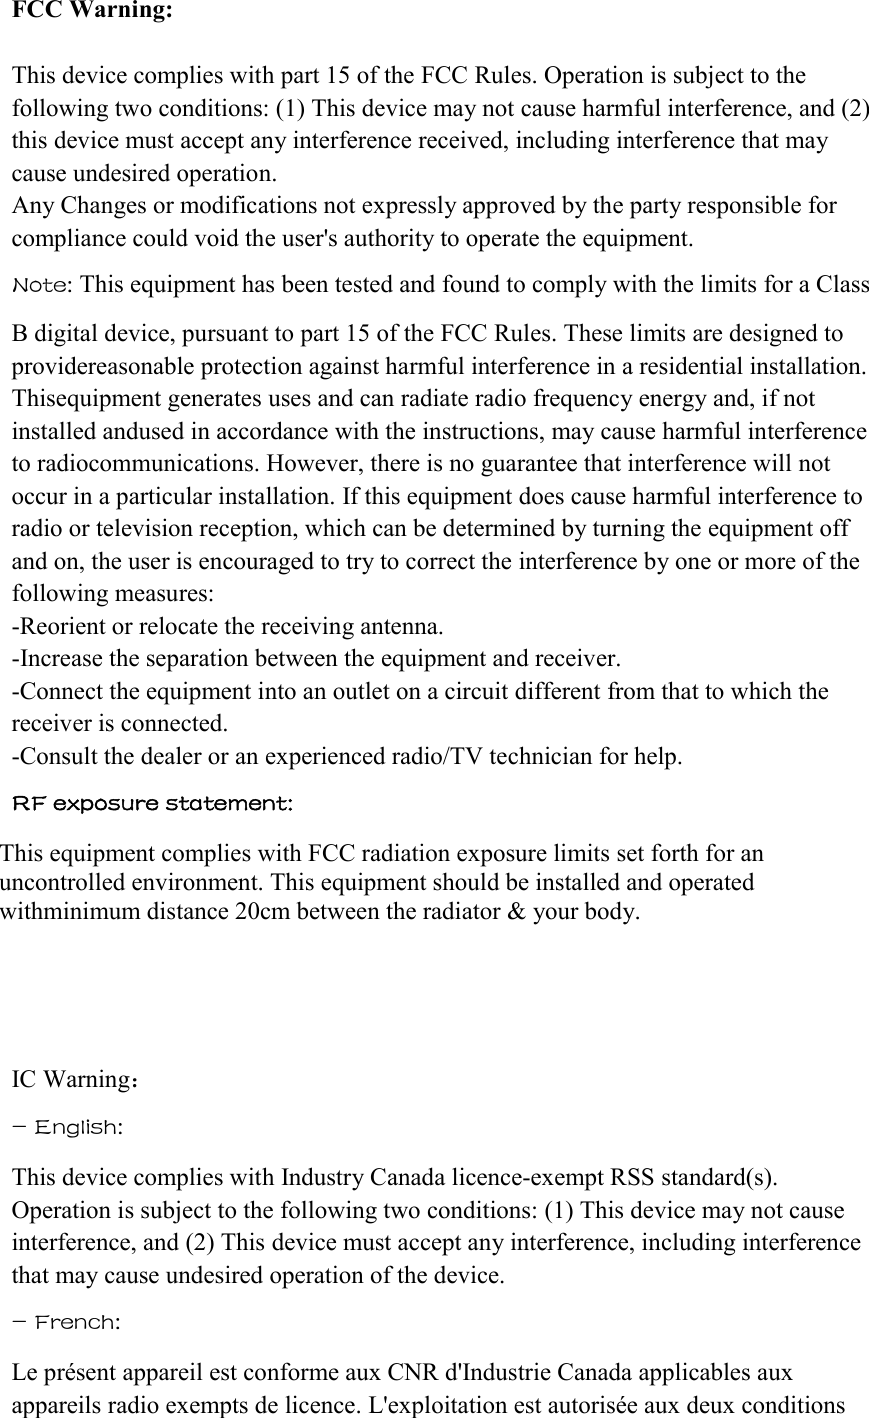 FCC Warning:  This device complies with part 15 of the FCC Rules. Operation is subject to the following two conditions: (1) This device may not cause harmful interference, and (2) this device must accept any interference received, including interference that may cause undesired operation. Any Changes or modifications not expressly approved by the party responsible for compliance could void the user&apos;s authority to operate the equipment. Note: This equipment has been tested and found to comply with the limits for a Class  B digital device, pursuant to part 15 of the FCC Rules. These limits are designed to providereasonable protection against harmful interference in a residential installation. Thisequipment generates uses and can radiate radio frequency energy and, if not installed andused in accordance with the instructions, may cause harmful interference to radiocommunications. However, there is no guarantee that interference will not occur in a particular installation. If this equipment does cause harmful interference to radio or television reception, which can be determined by turning the equipment off and on, the user is encouraged to try to correct the interference by one or more of the following measures: -Reorient or relocate the receiving antenna. -Increase the separation between the equipment and receiver. -Connect the equipment into an outlet on a circuit different from that to which the receiver is connected. -Consult the dealer or an experienced radio/TV technician for help.  RF exposure statement:  This equipment complies with FCC radiation exposure limits set forth for an uncontrolled environment. This equipment should be installed and operated withminimum distance 20cm between the radiator &amp; your body.       IC Warning：  - English:  This device complies with Industry Canada licence-exempt RSS standard(s). Operation is subject to the following two conditions: (1) This device may not cause interference, and (2) This device must accept any interference, including interference that may cause undesired operation of the device. - French:  Le présent appareil est conforme aux CNR d&apos;Industrie Canada applicables aux appareils radio exempts de licence. L&apos;exploitation est autorisée aux deux conditions 